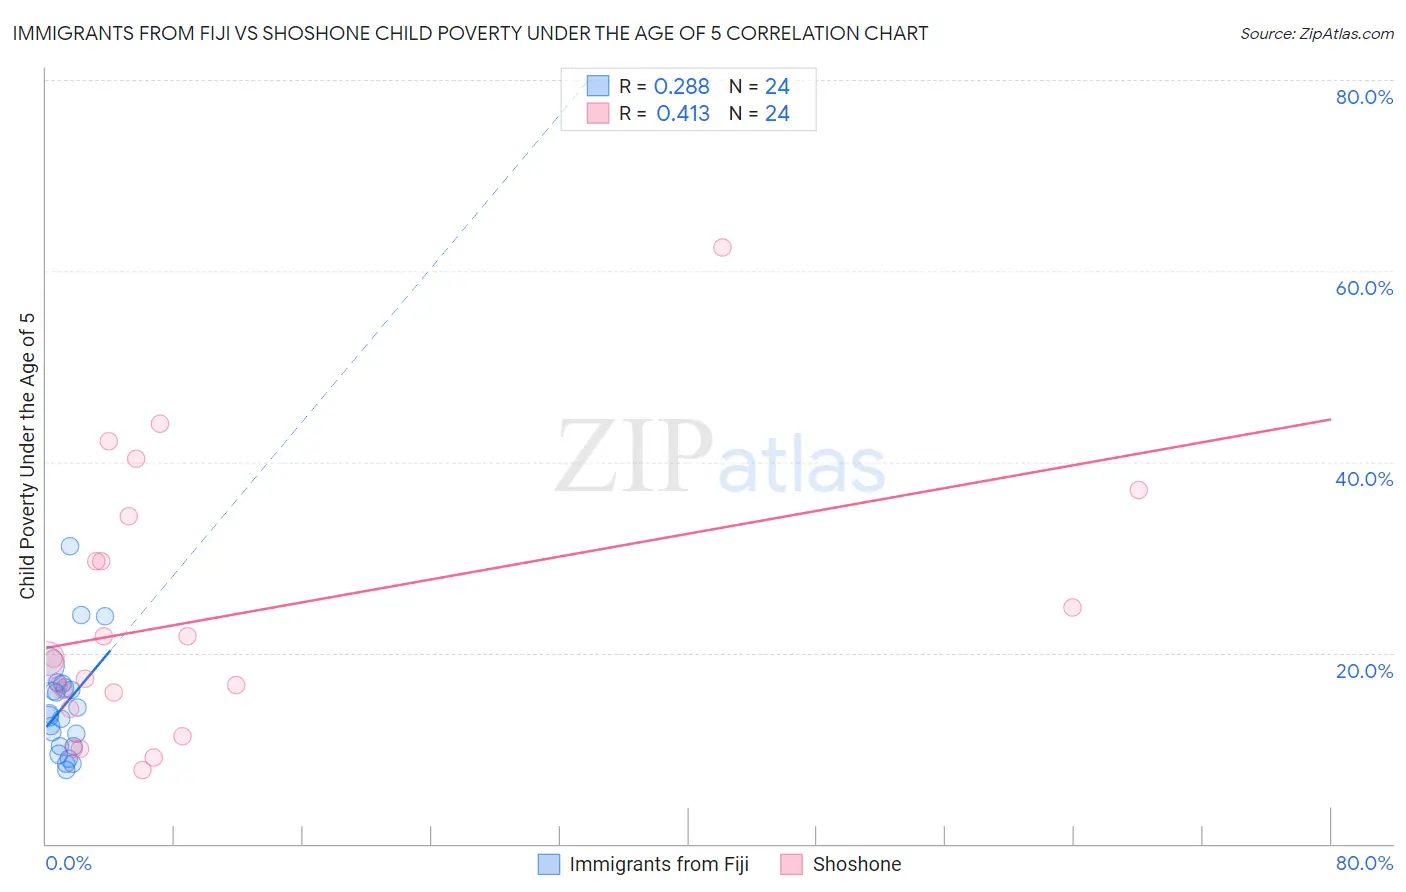 Immigrants from Fiji vs Shoshone Child Poverty Under the Age of 5